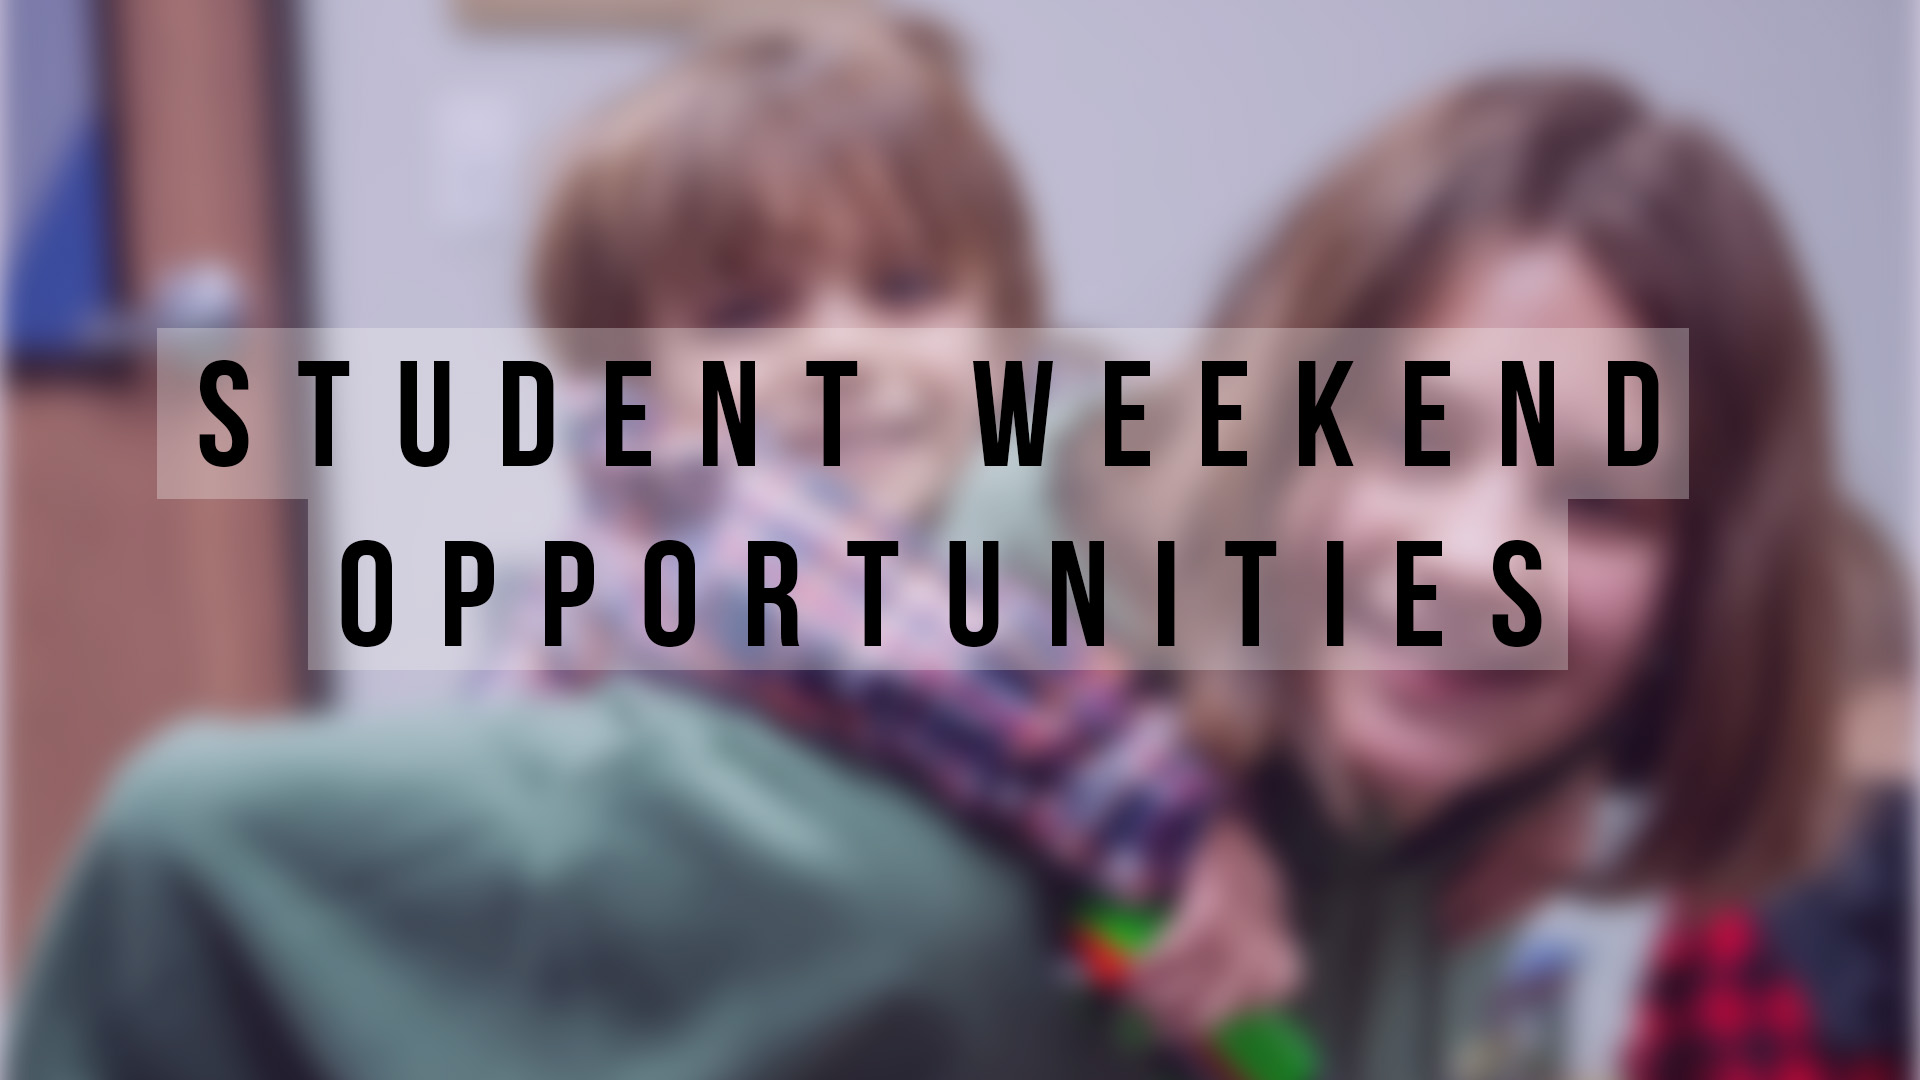 Student Weekend Serving Opportunities

7th - 12th Grade Students
